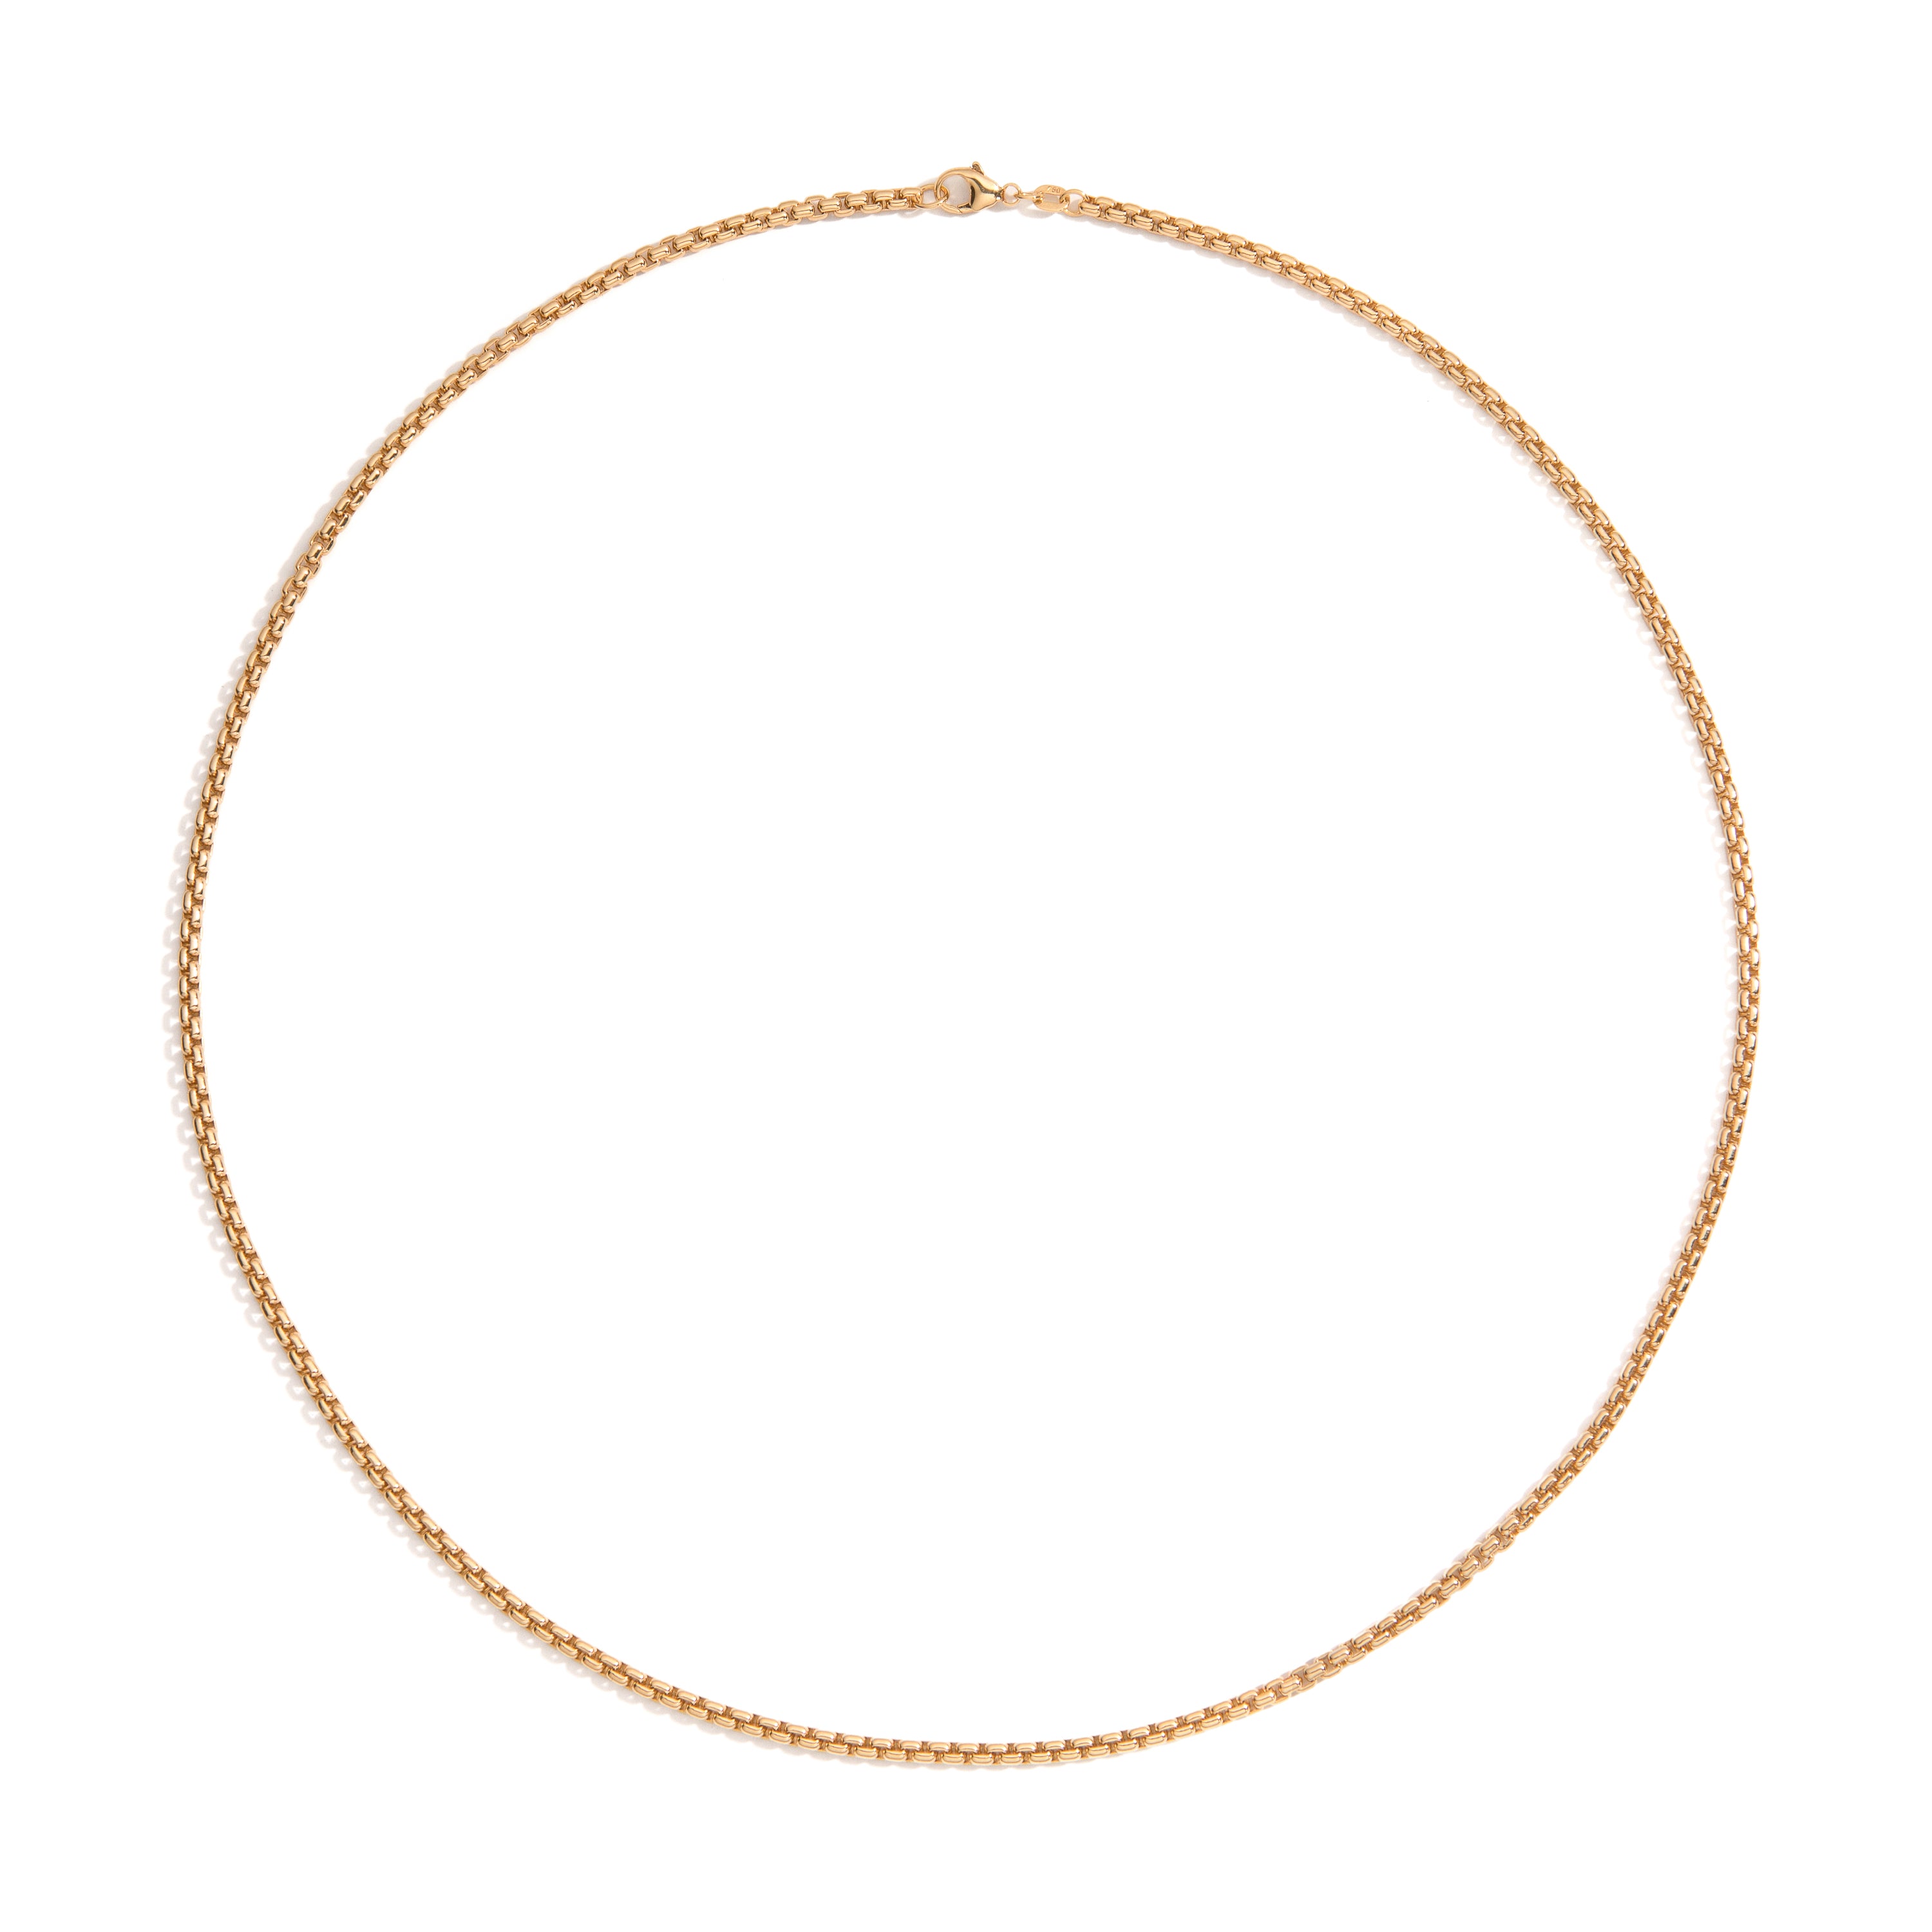 Shahla Karimi 3.66mm Rounded Box Chain Necklace 14K Yellow Gold